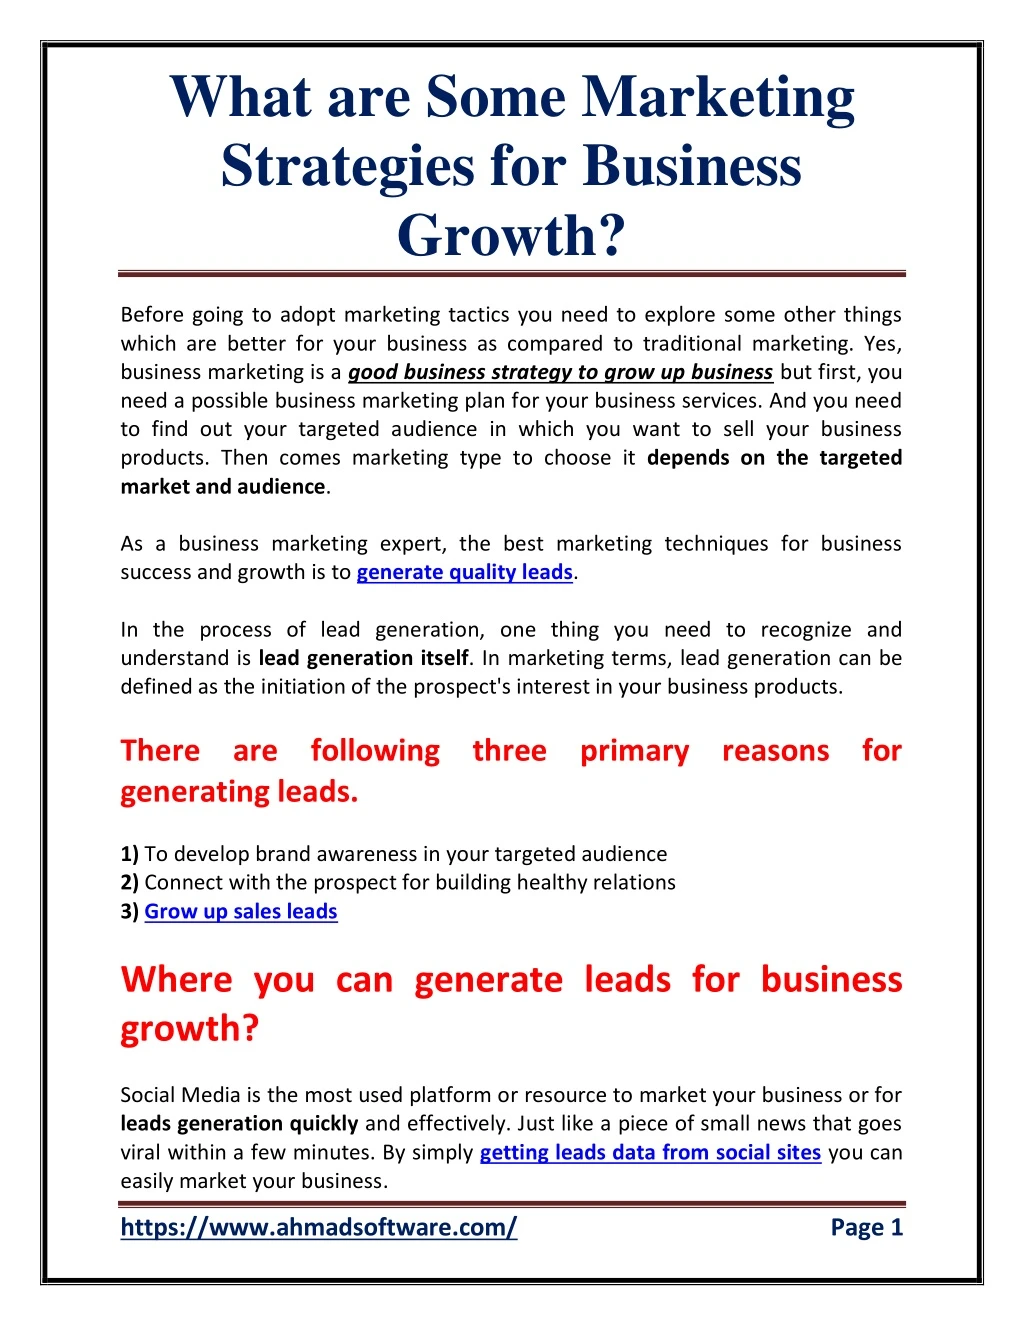 what are some marketing strategies for business